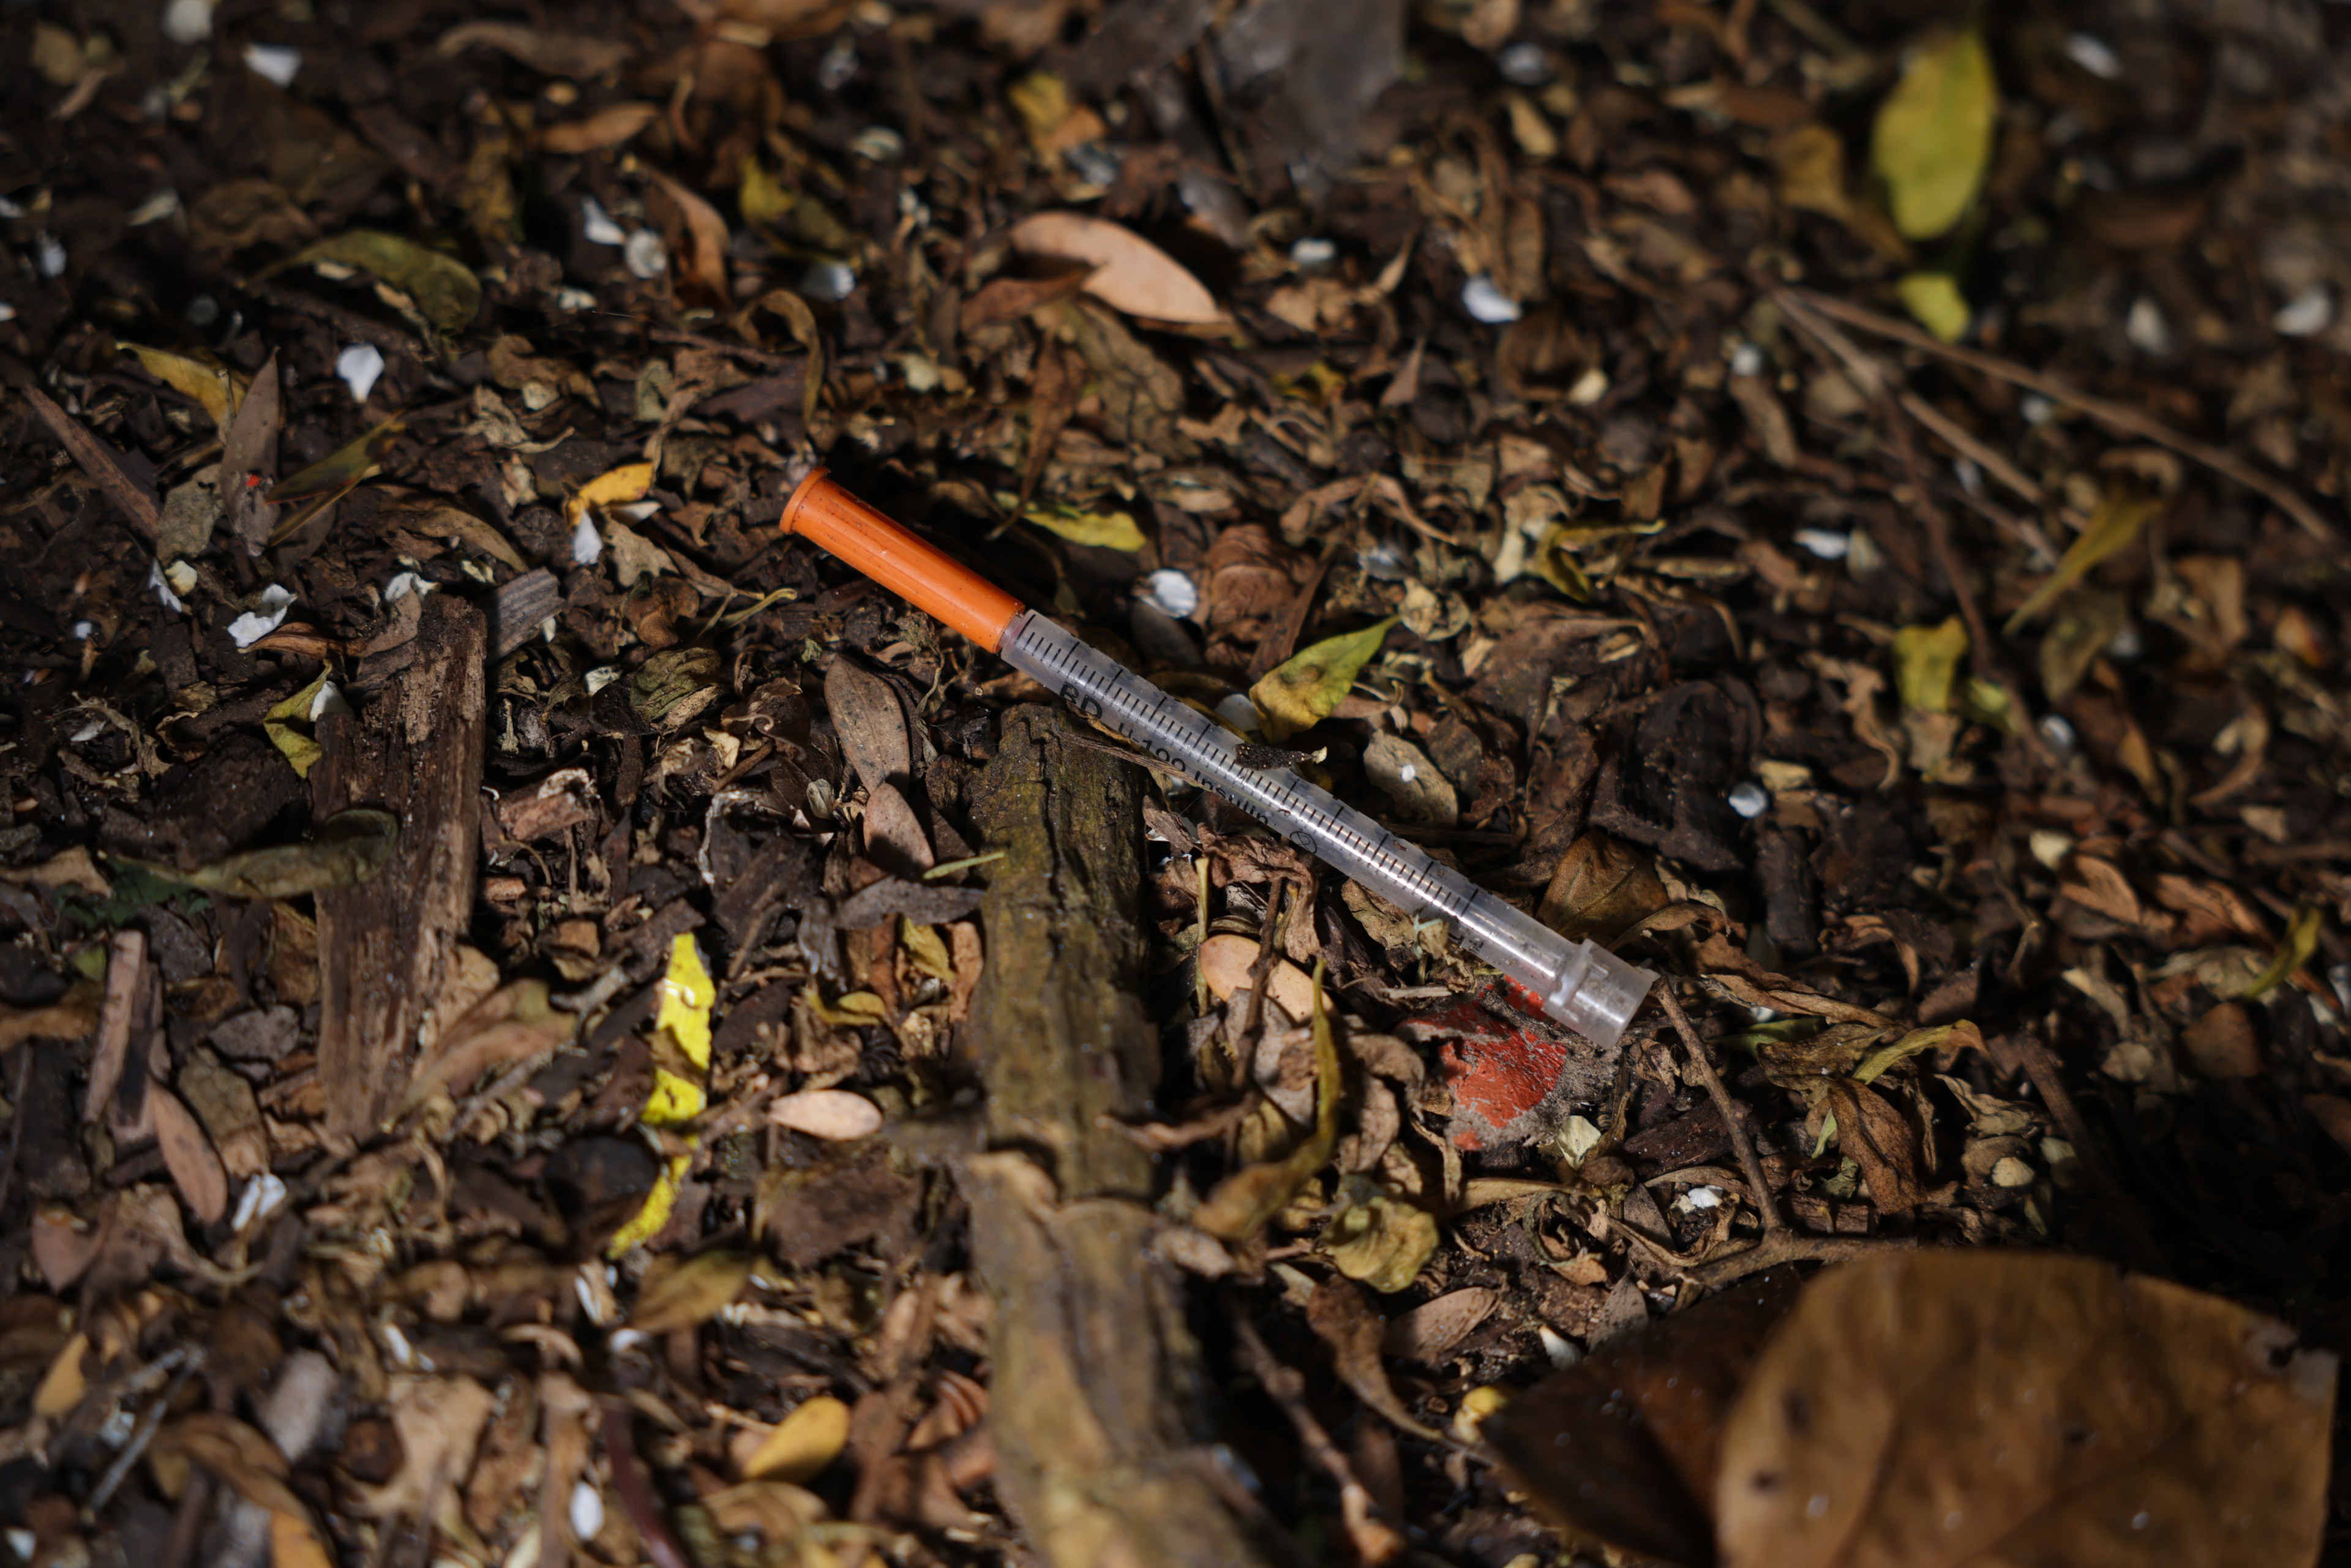 A needle on the ground in an abandoned campsite